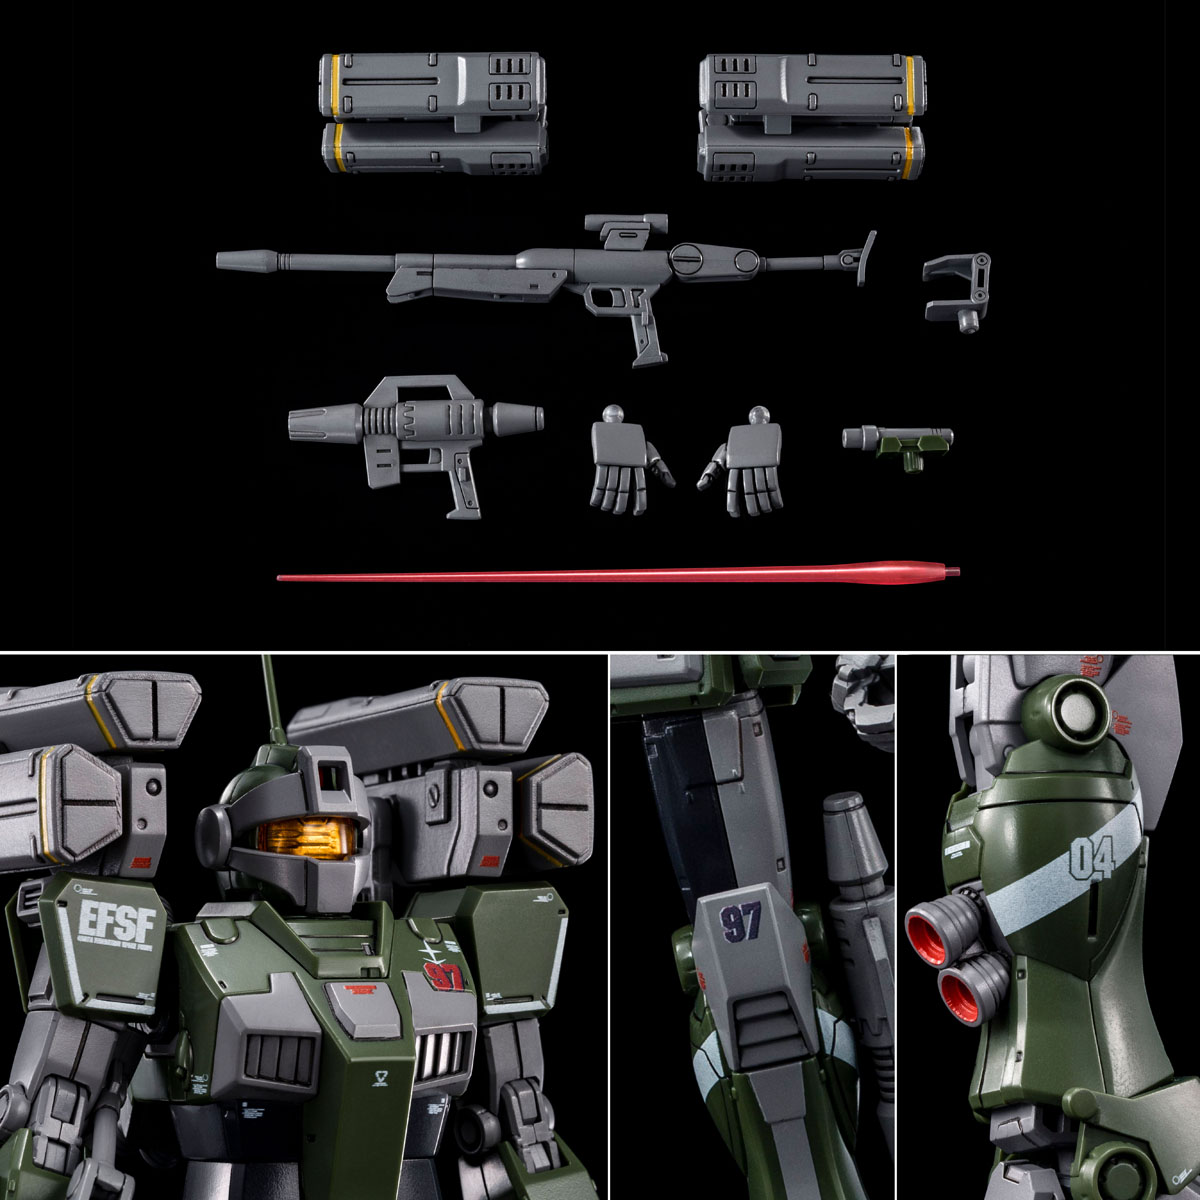 HG 1/144 GM SNIPER CUSTOM (with MISSILE LAUNCHER)